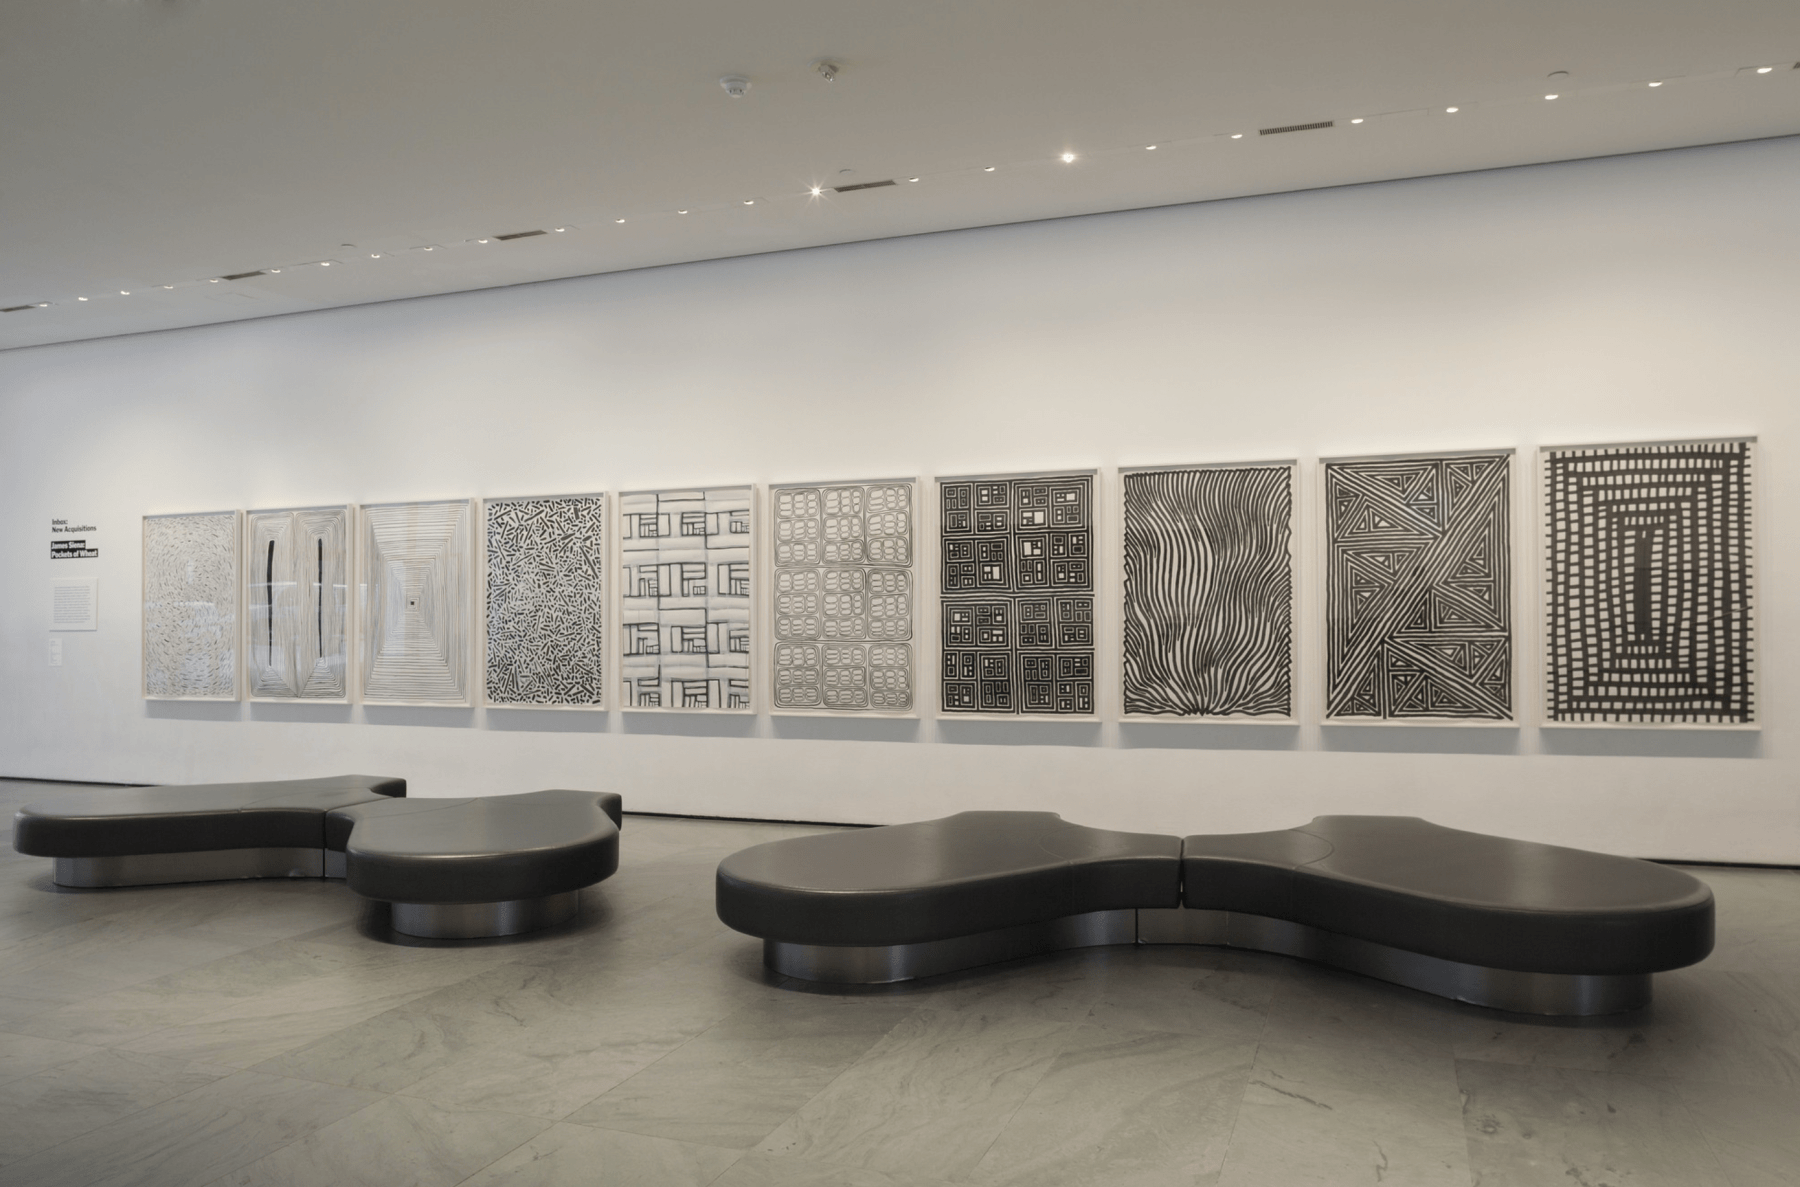 Installation view of James Siena&amp;rsquo;s&amp;nbsp;Pockets of Wheat.&amp;nbsp;1996. The Museum of Modern Art, New York. &amp;copy; 2016 James Siena Photo: Yan Pan